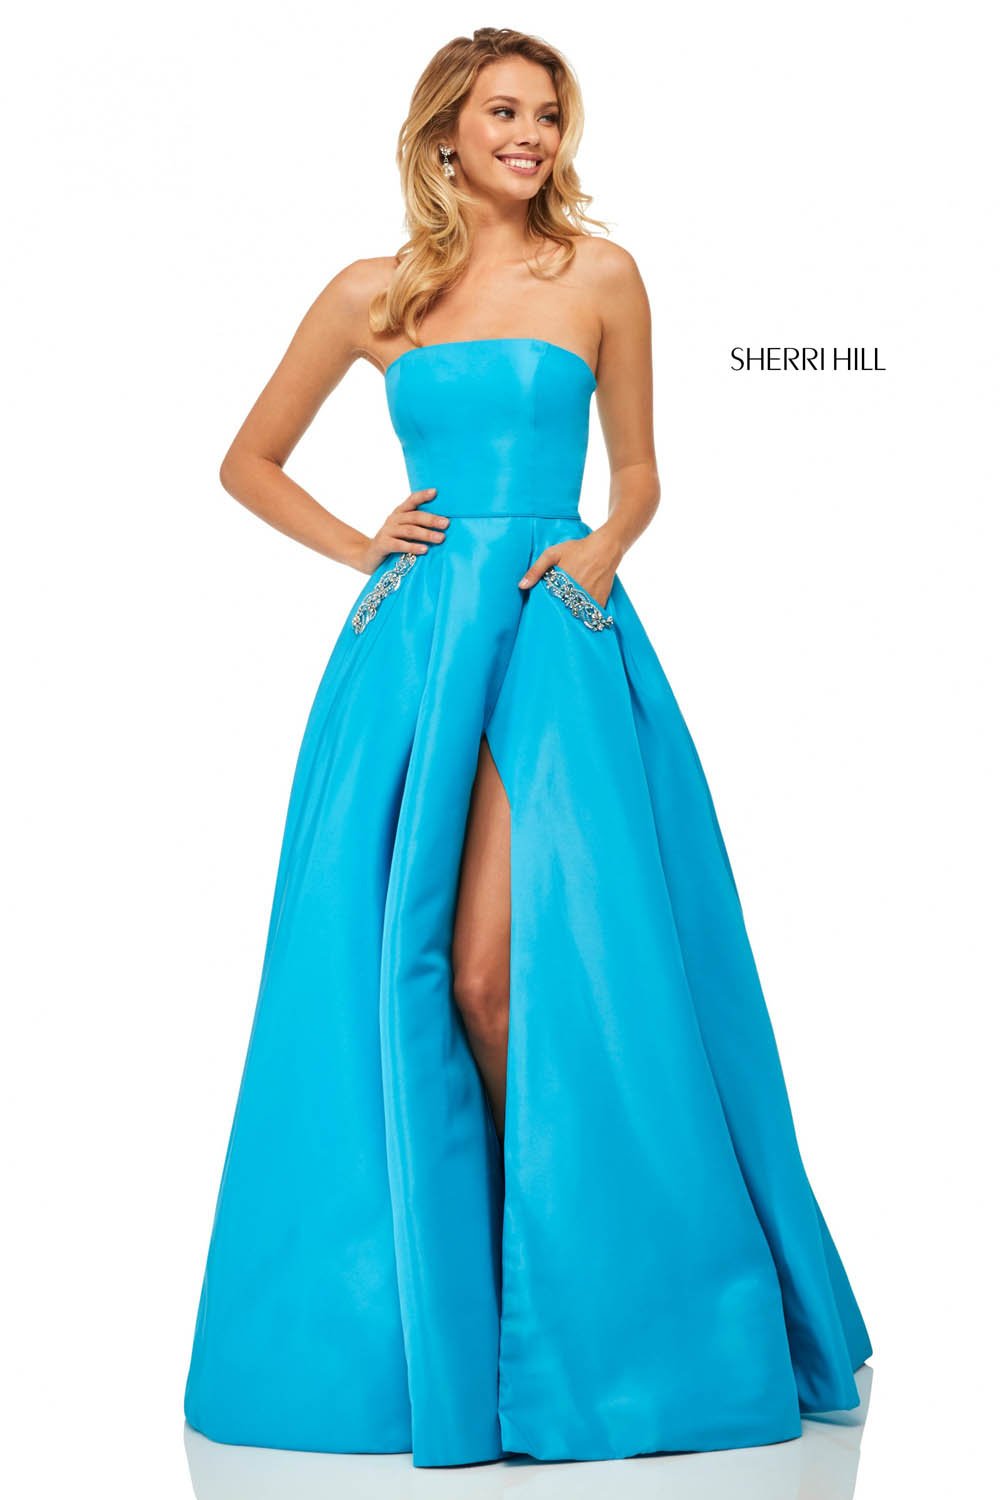 Sherri Hill 52871 dress images in these colors: Navy, Turquoise, Coral, Light Blue, Yellow, Black, Ivory.